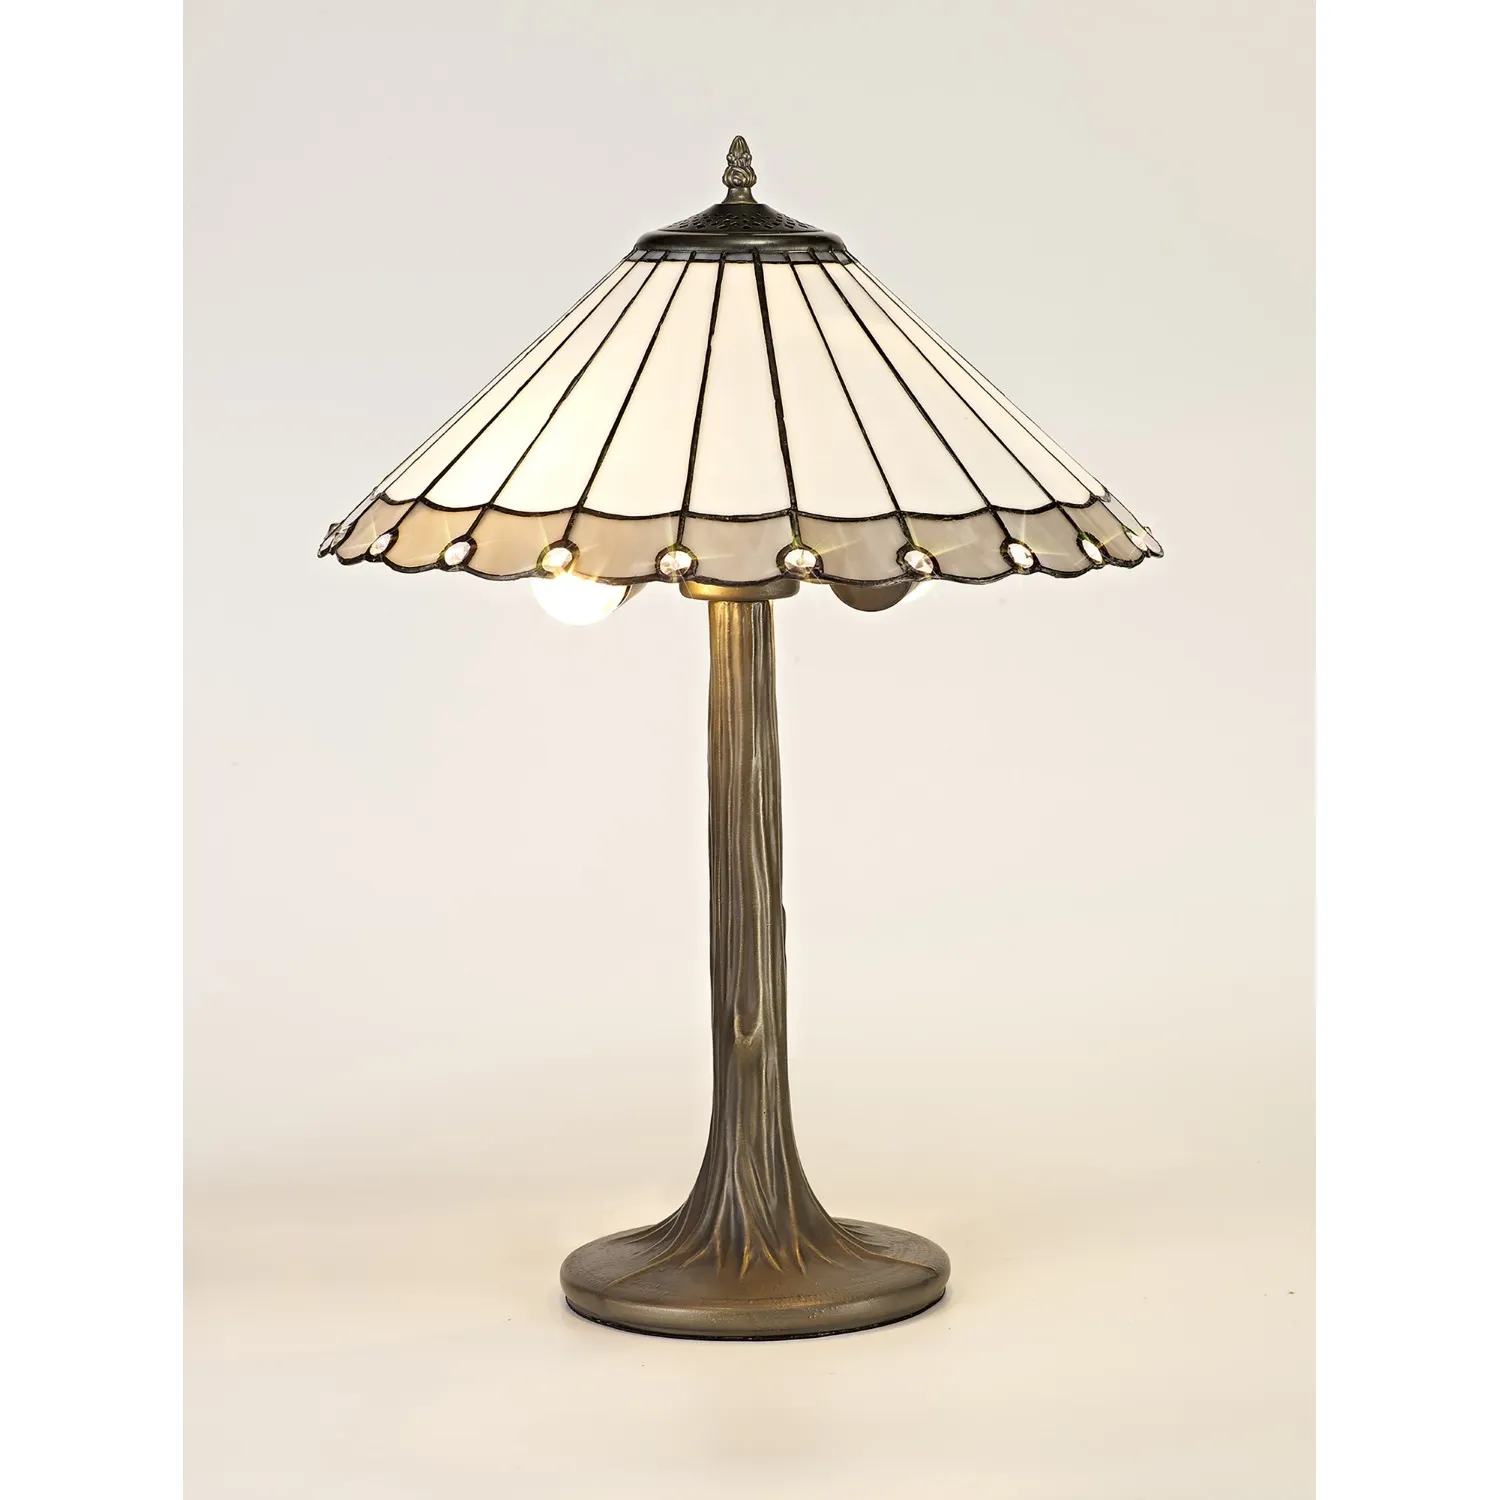 Ware 2 Light Tree Like Table Lamp E27 With 40cm Tiffany Shade, Grey Cream Crystal Aged Antique Brass